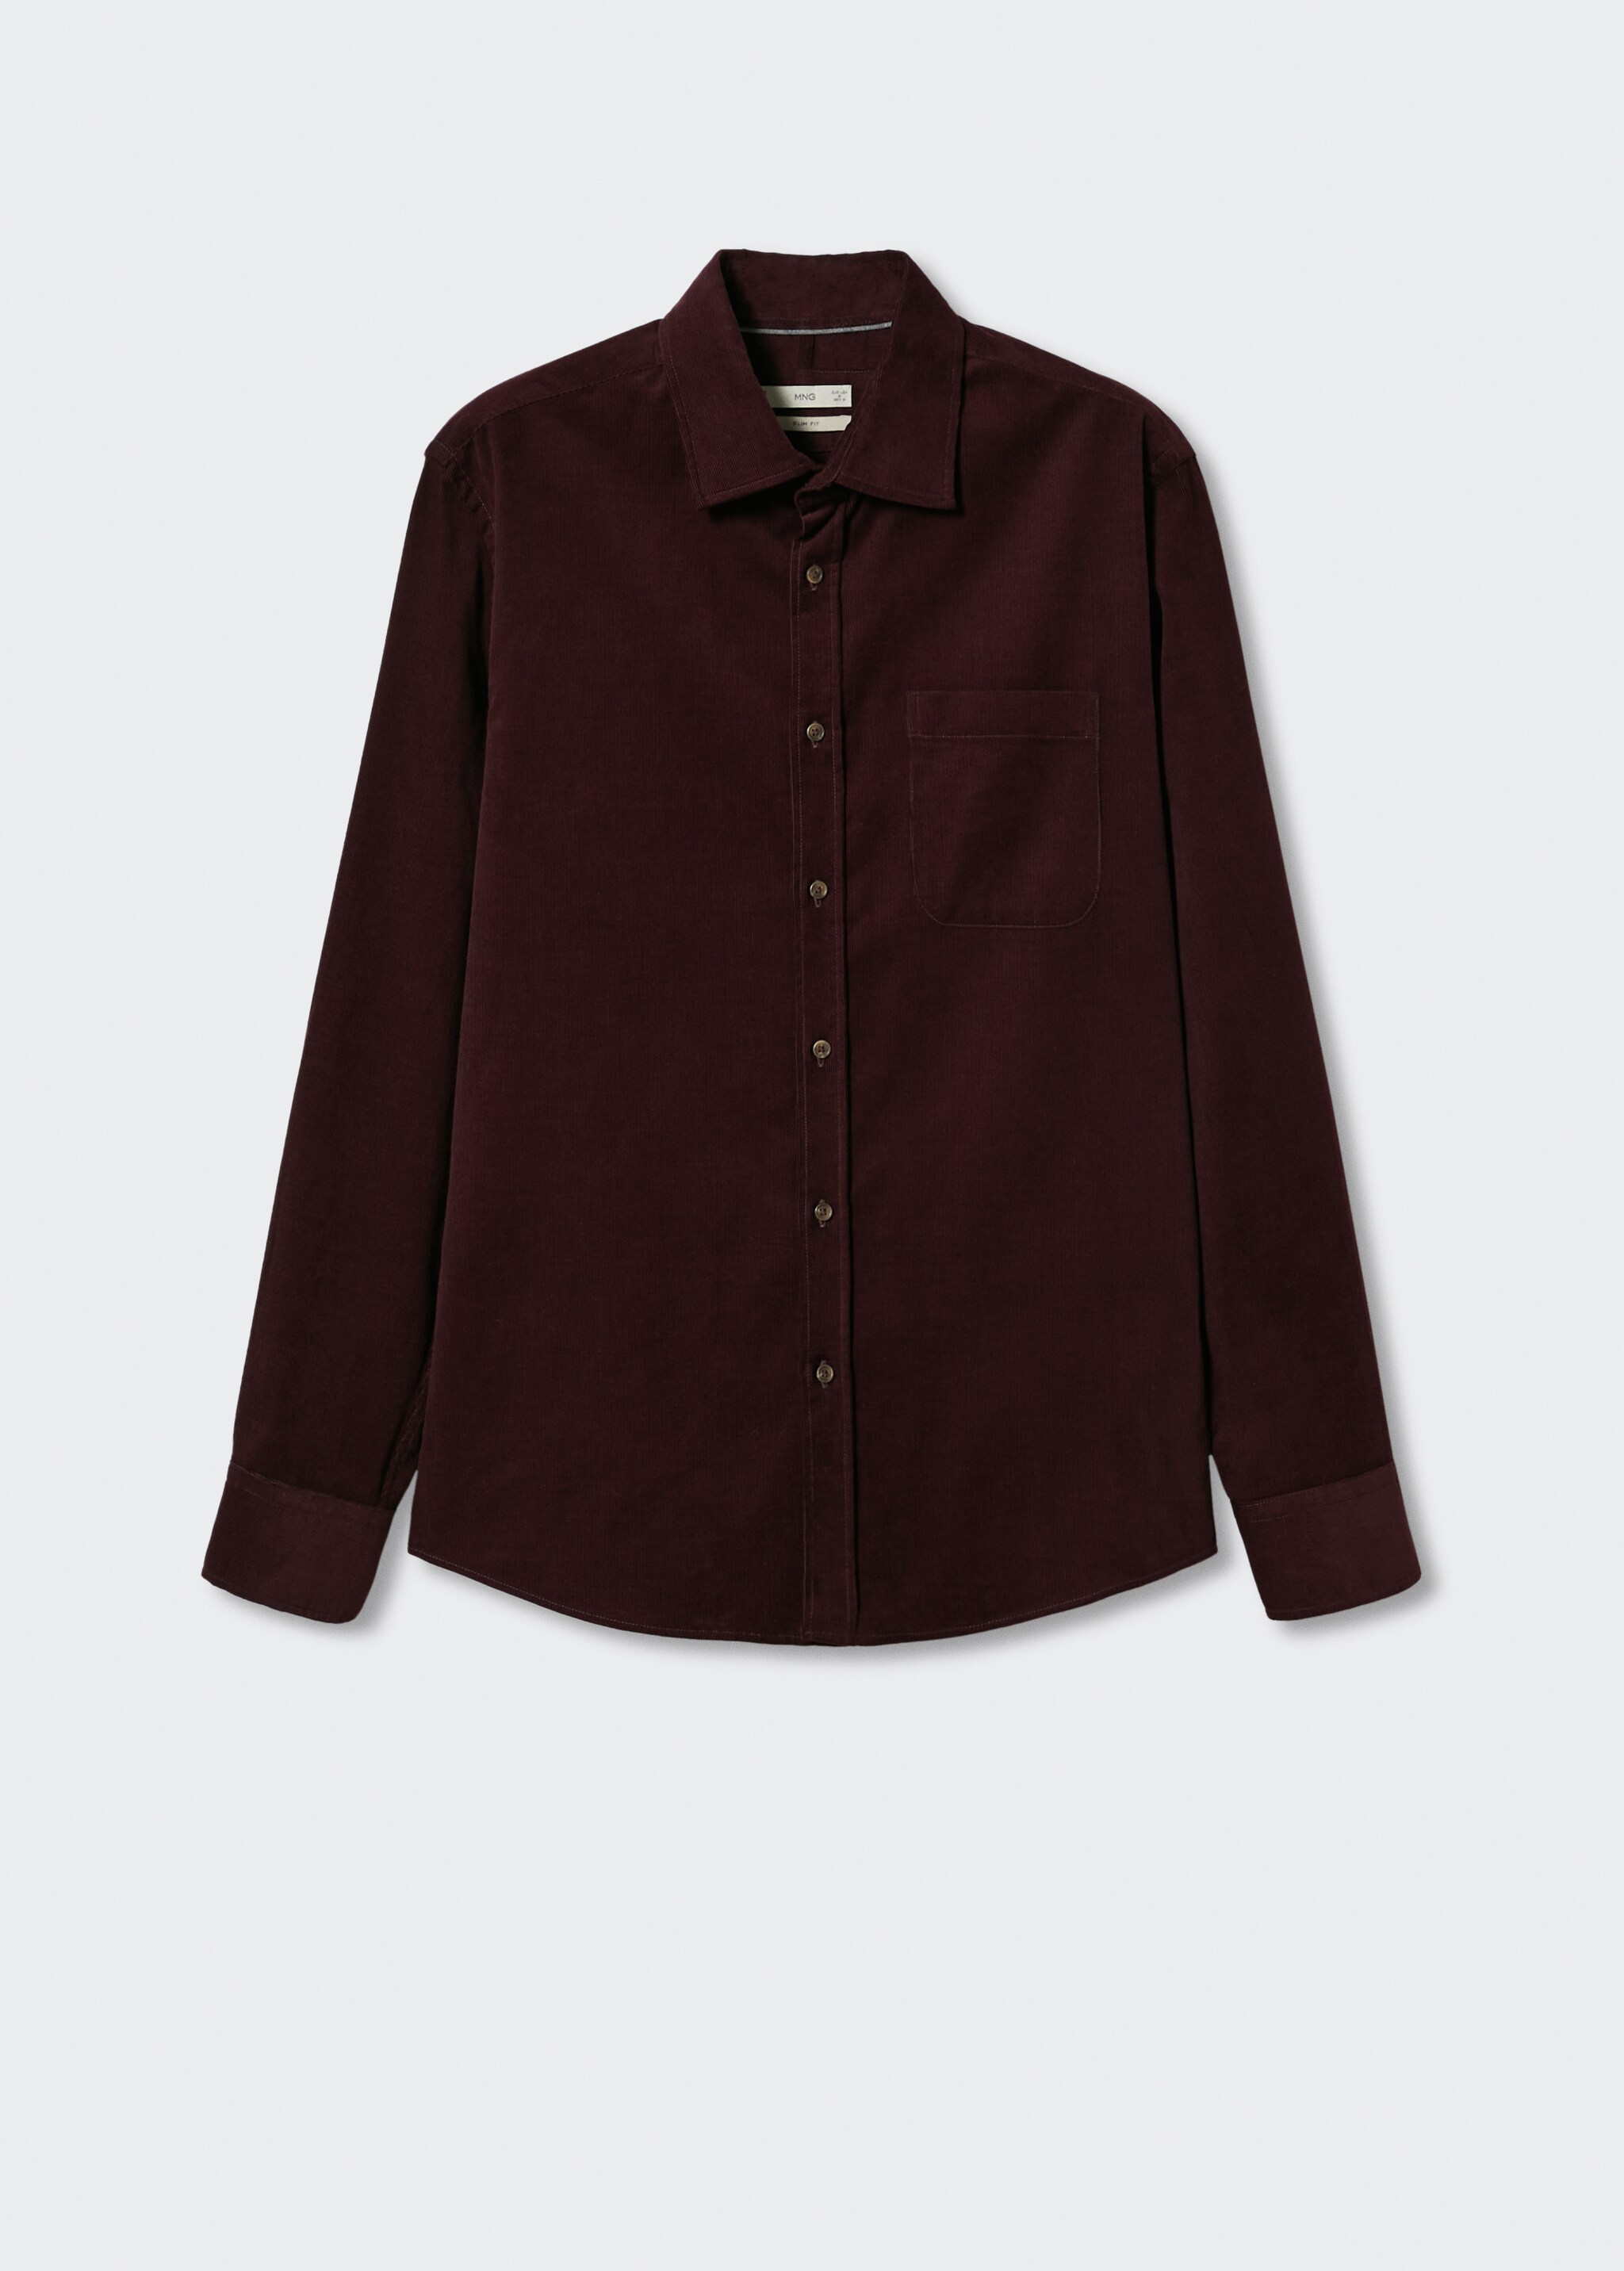 Regular fit micro corduroy shirt - Article without model